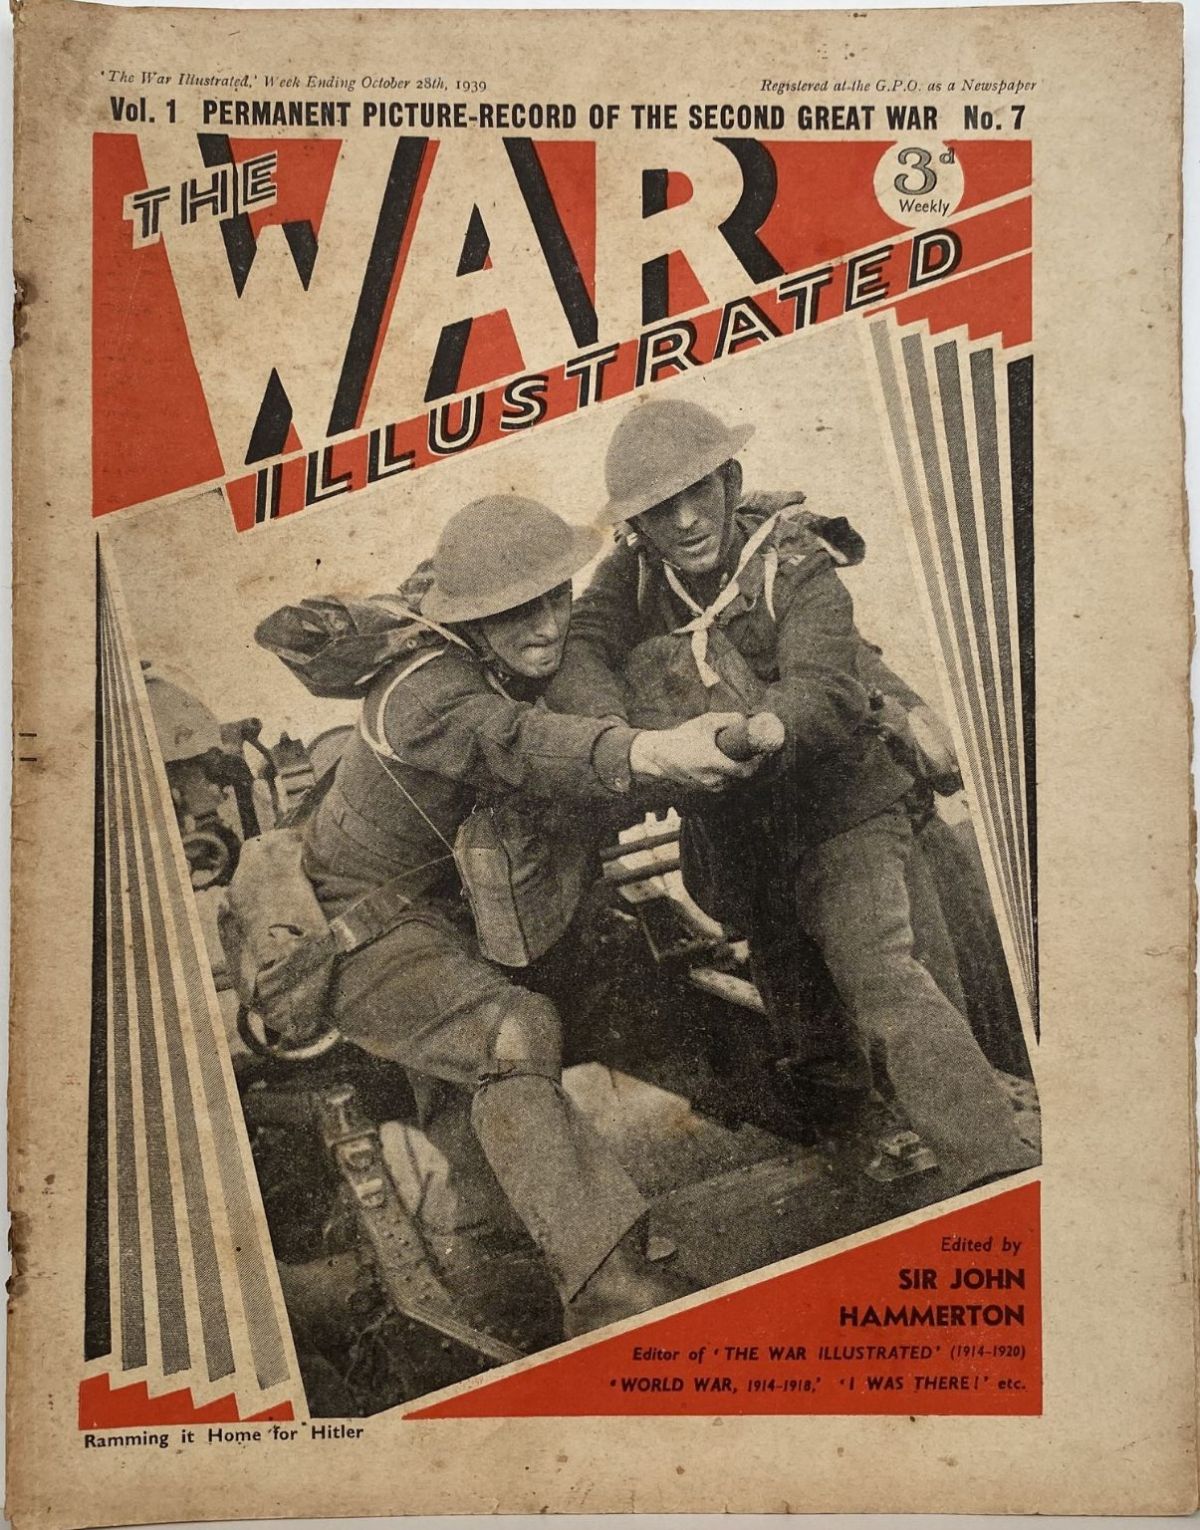 THE WAR ILLUSTRATED - Vol 1, No 7, 28th Oct 1939